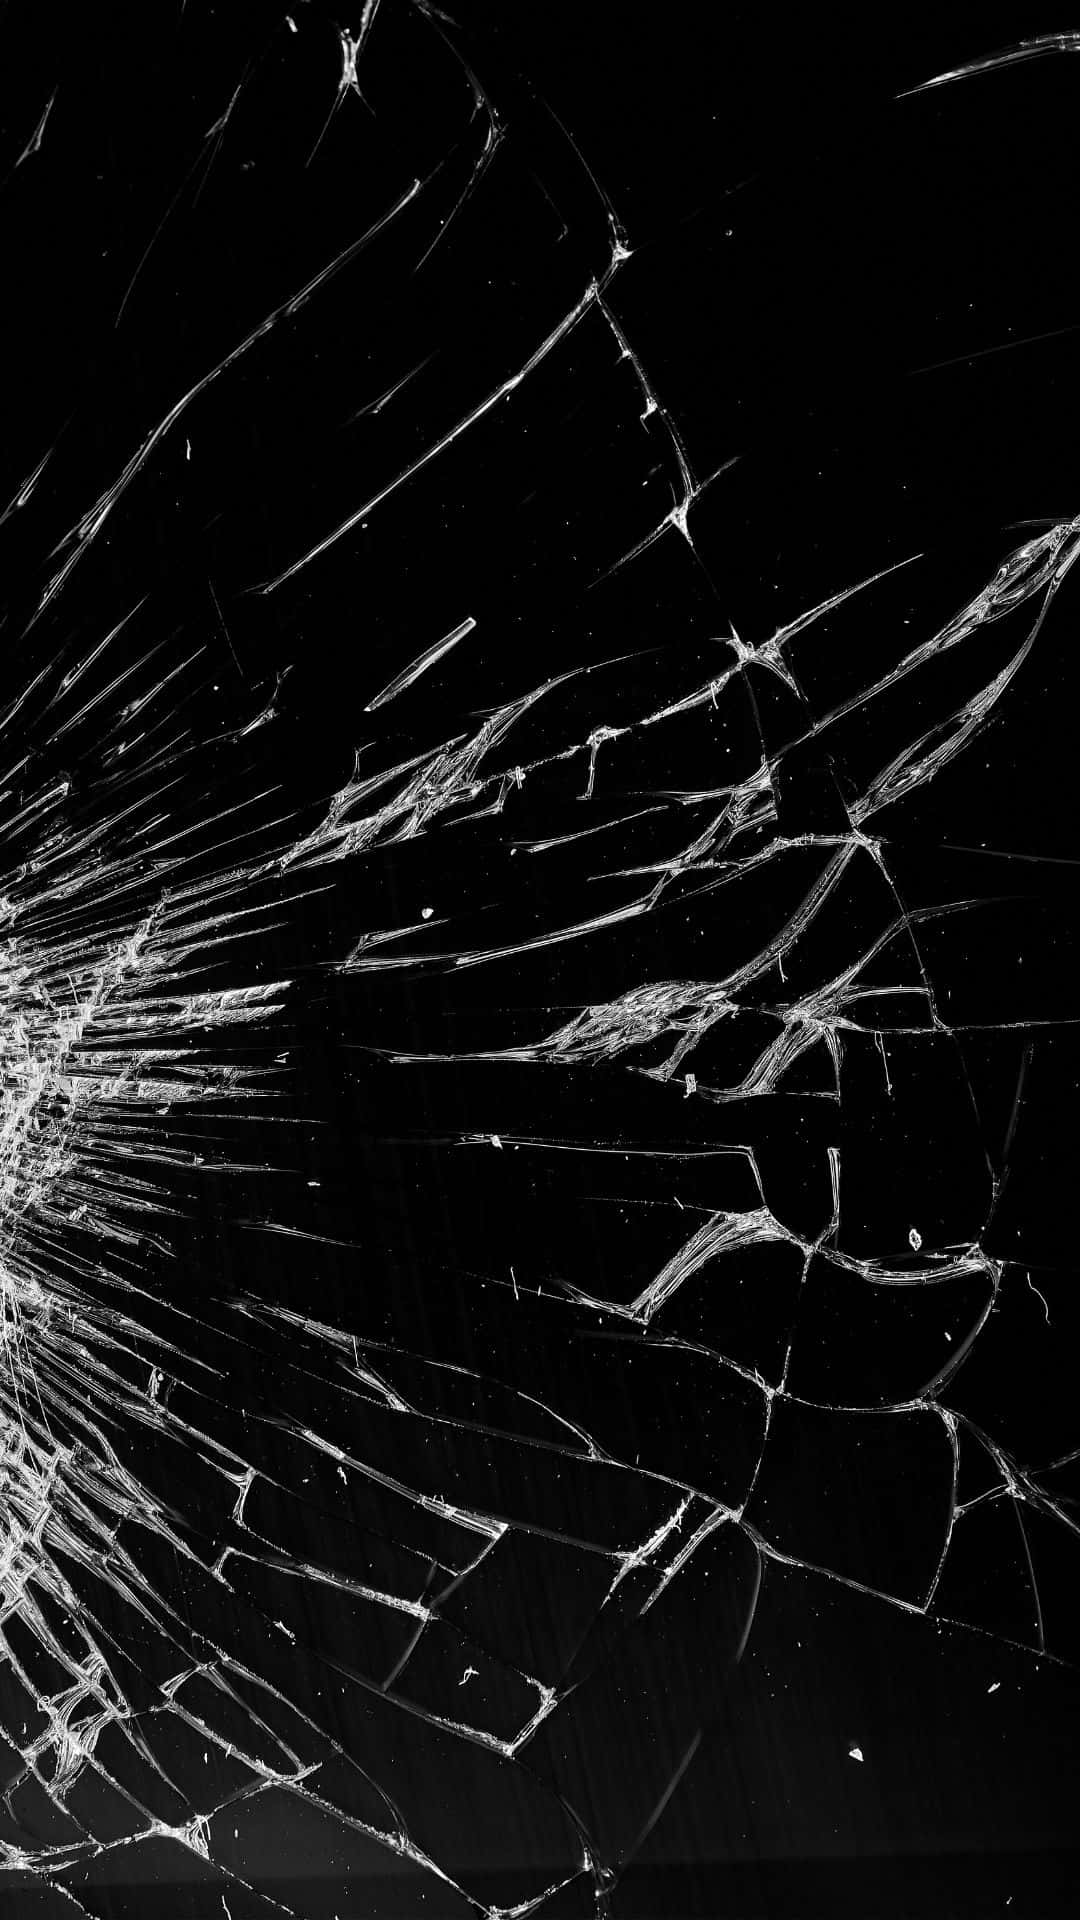 Cracked Screen Wallpaper for Mobile Devices